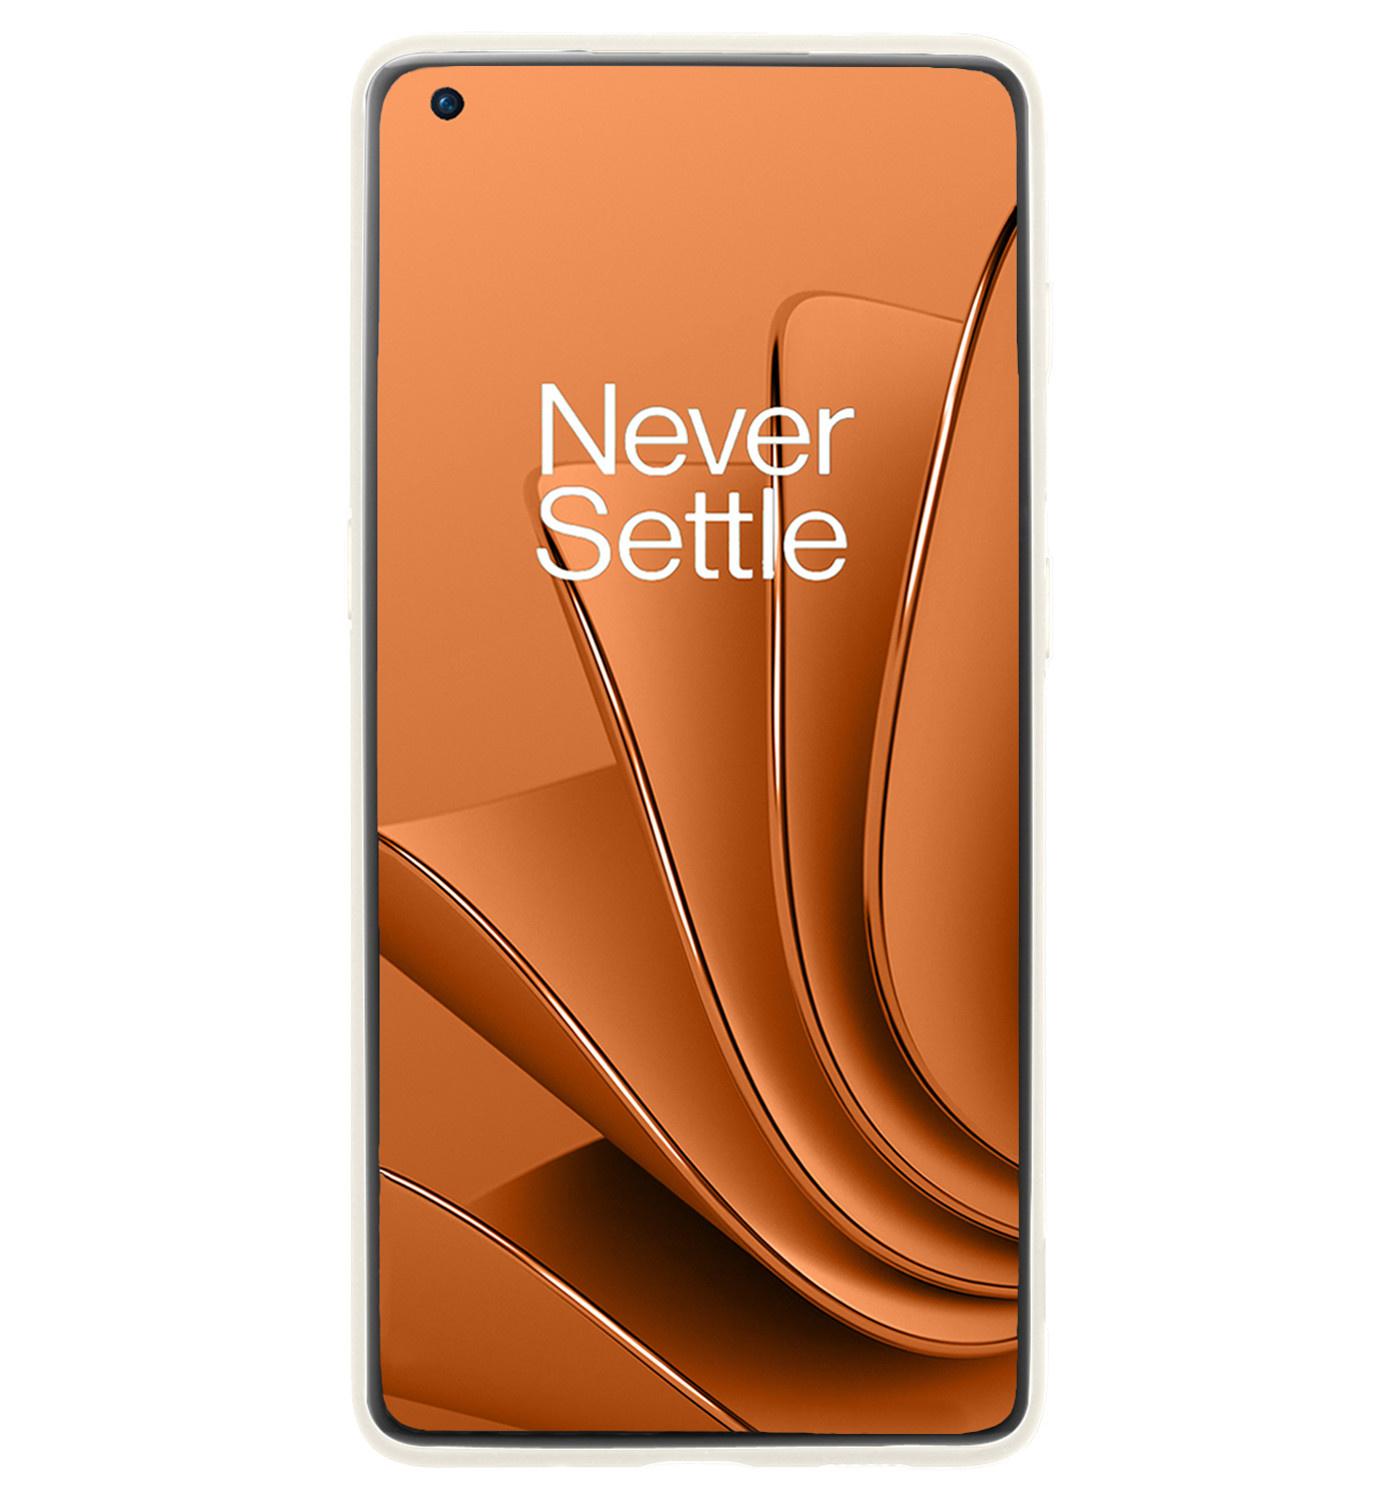 Nomfy OnePlus 10 Pro Hoesje Siliconen - OnePlus 10 Pro Hoesje Wit Case - OnePlus 10 Pro Cover Siliconen Back Cover - Wit